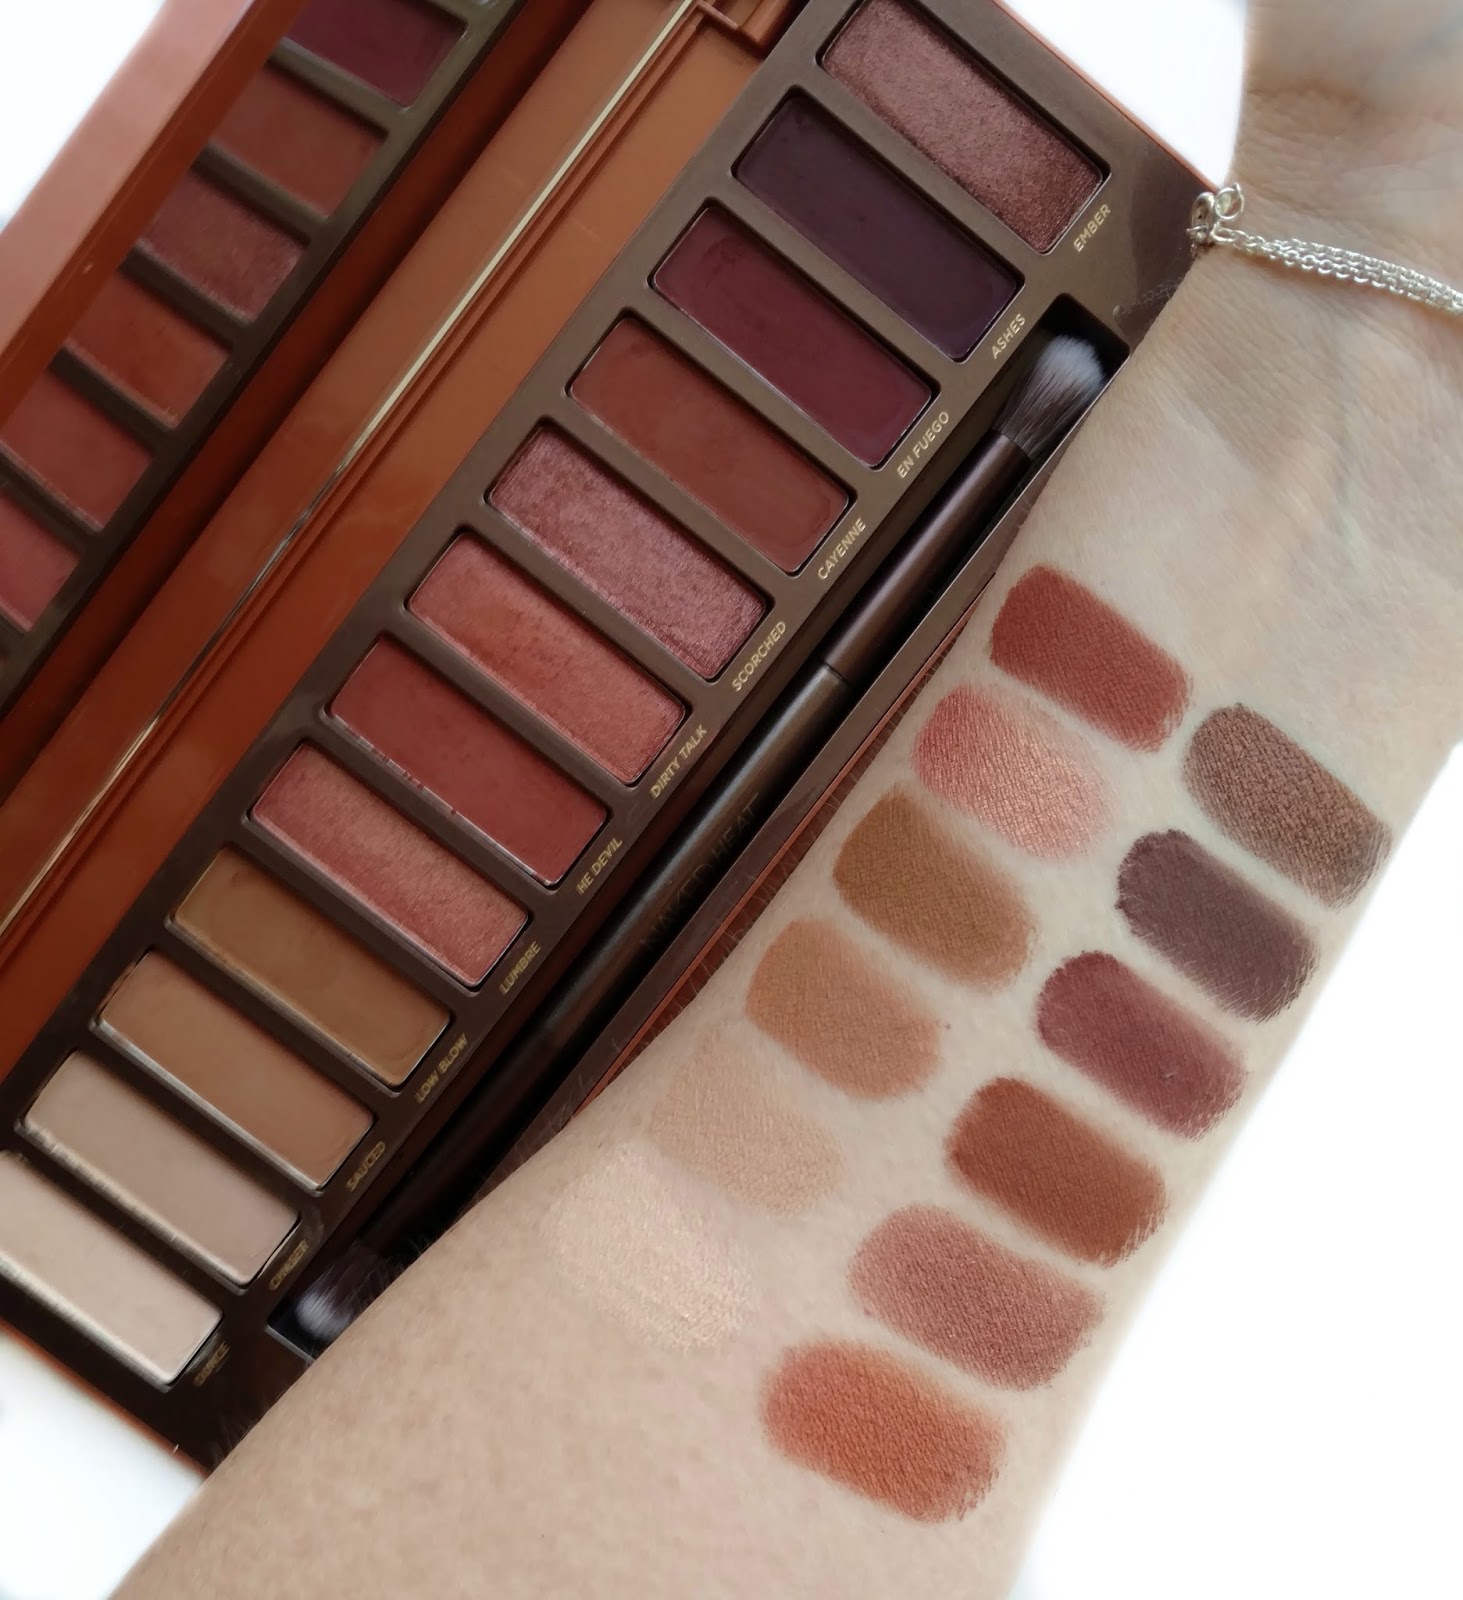 Review: Urban Decay Naked Heat Palette with Swatches 